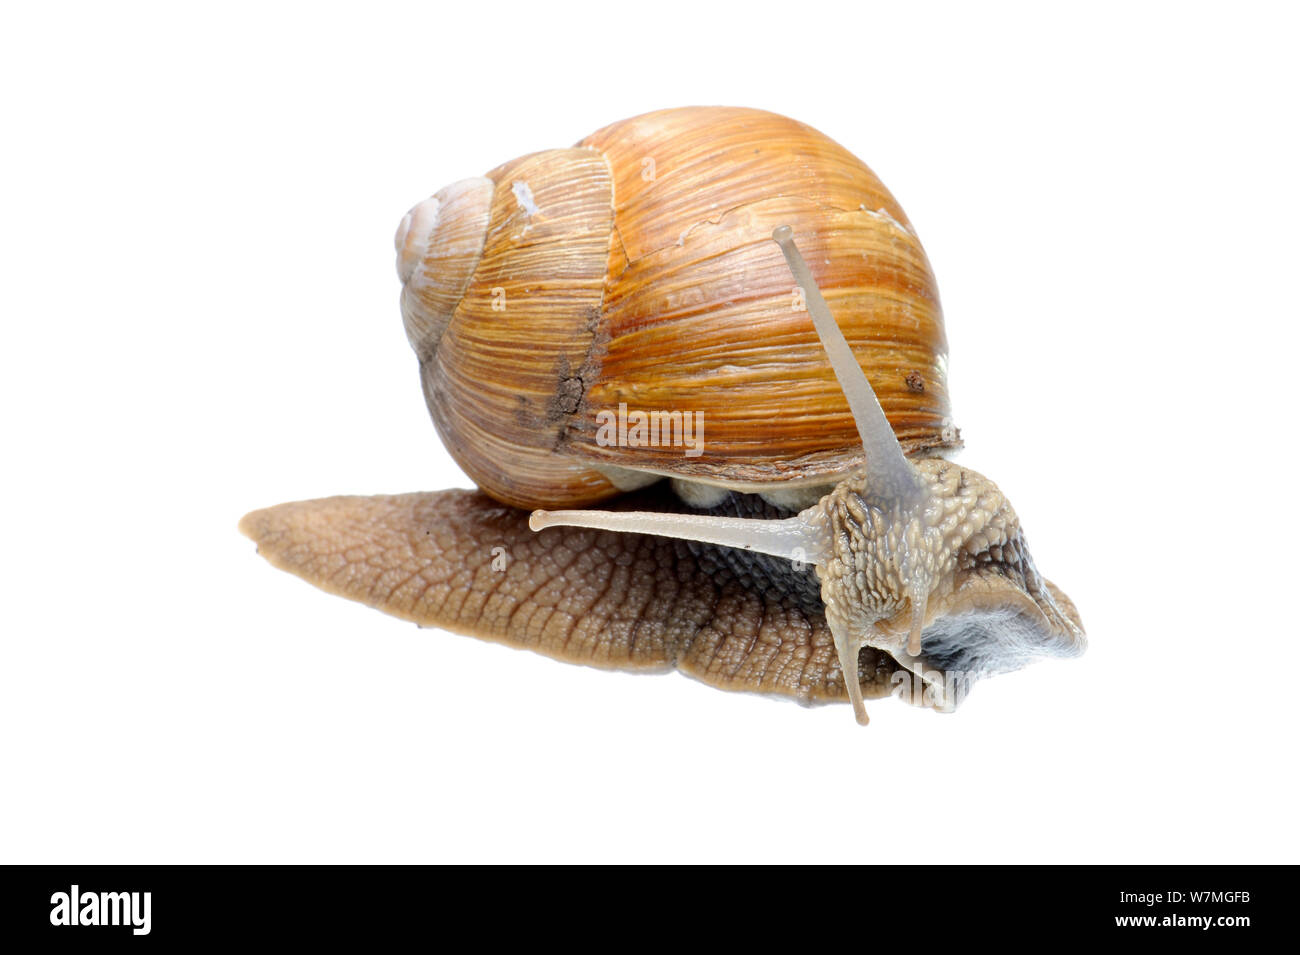 Roman / Edible snail (Helix pomatia) with foot extended, meadowland, Osilnica, Slovenia, Europe, May. meetyourneighbours.net project Stock Photo